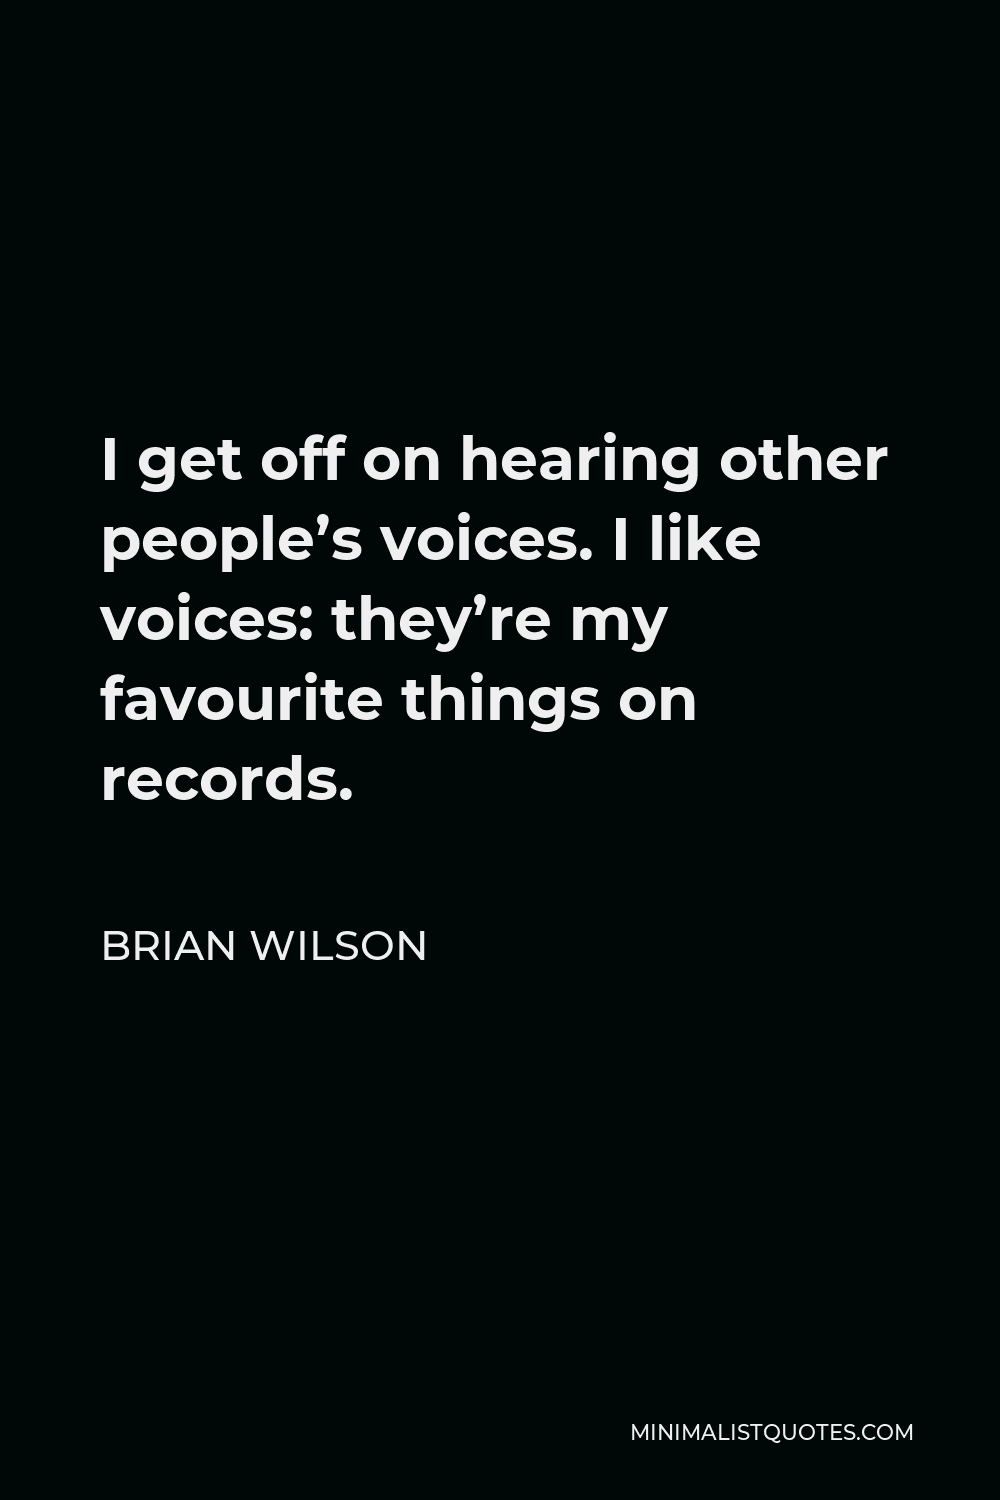 Brian Wilson Quote - I get off on hearing other people’s voices. I like voices: they’re my favourite things on records.